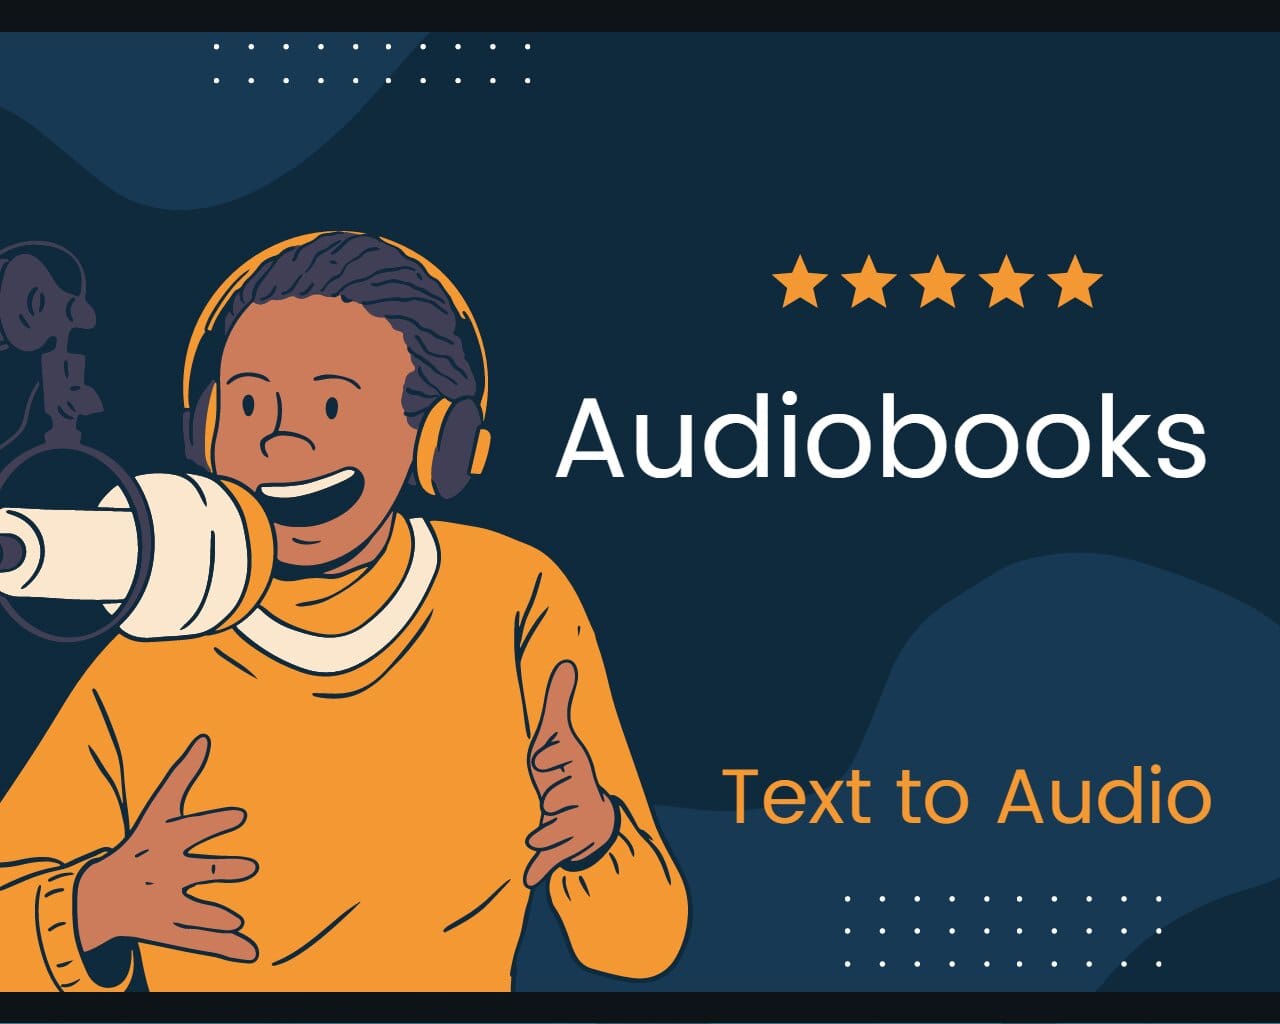 I will make an audiobook or audiobooks